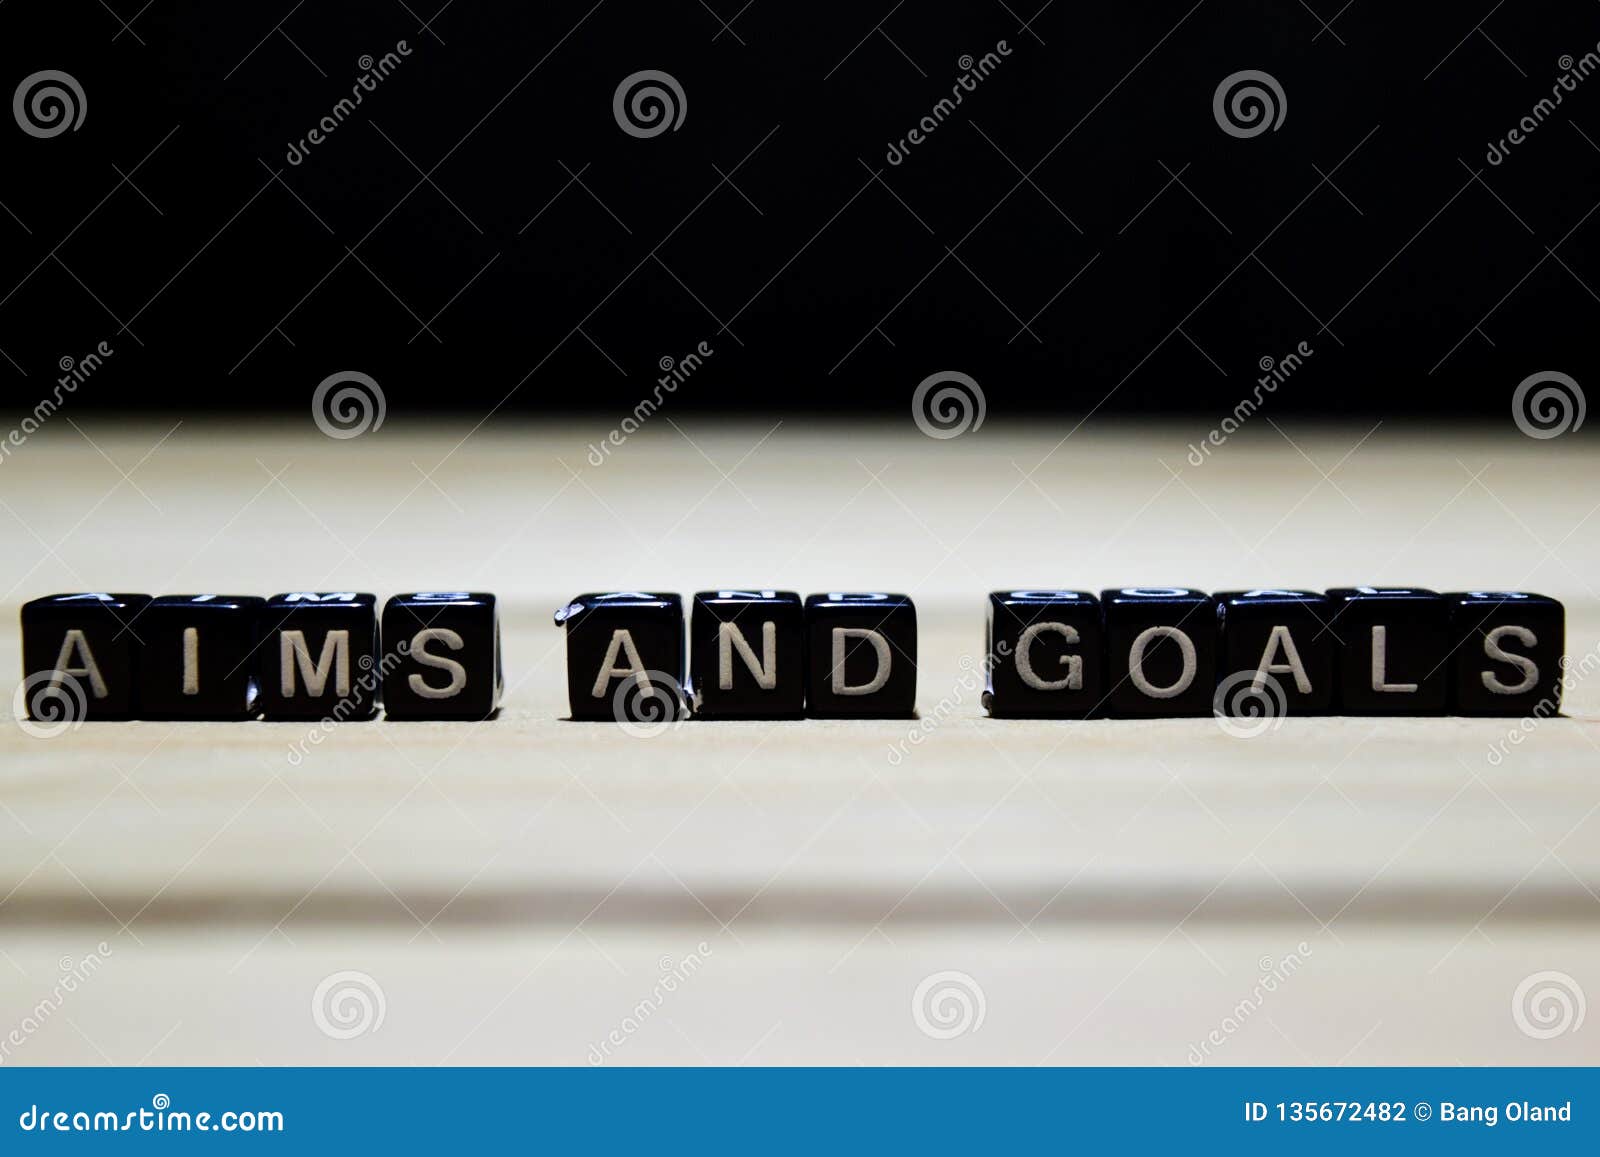 aims and goals concept wooden blocks on the table.